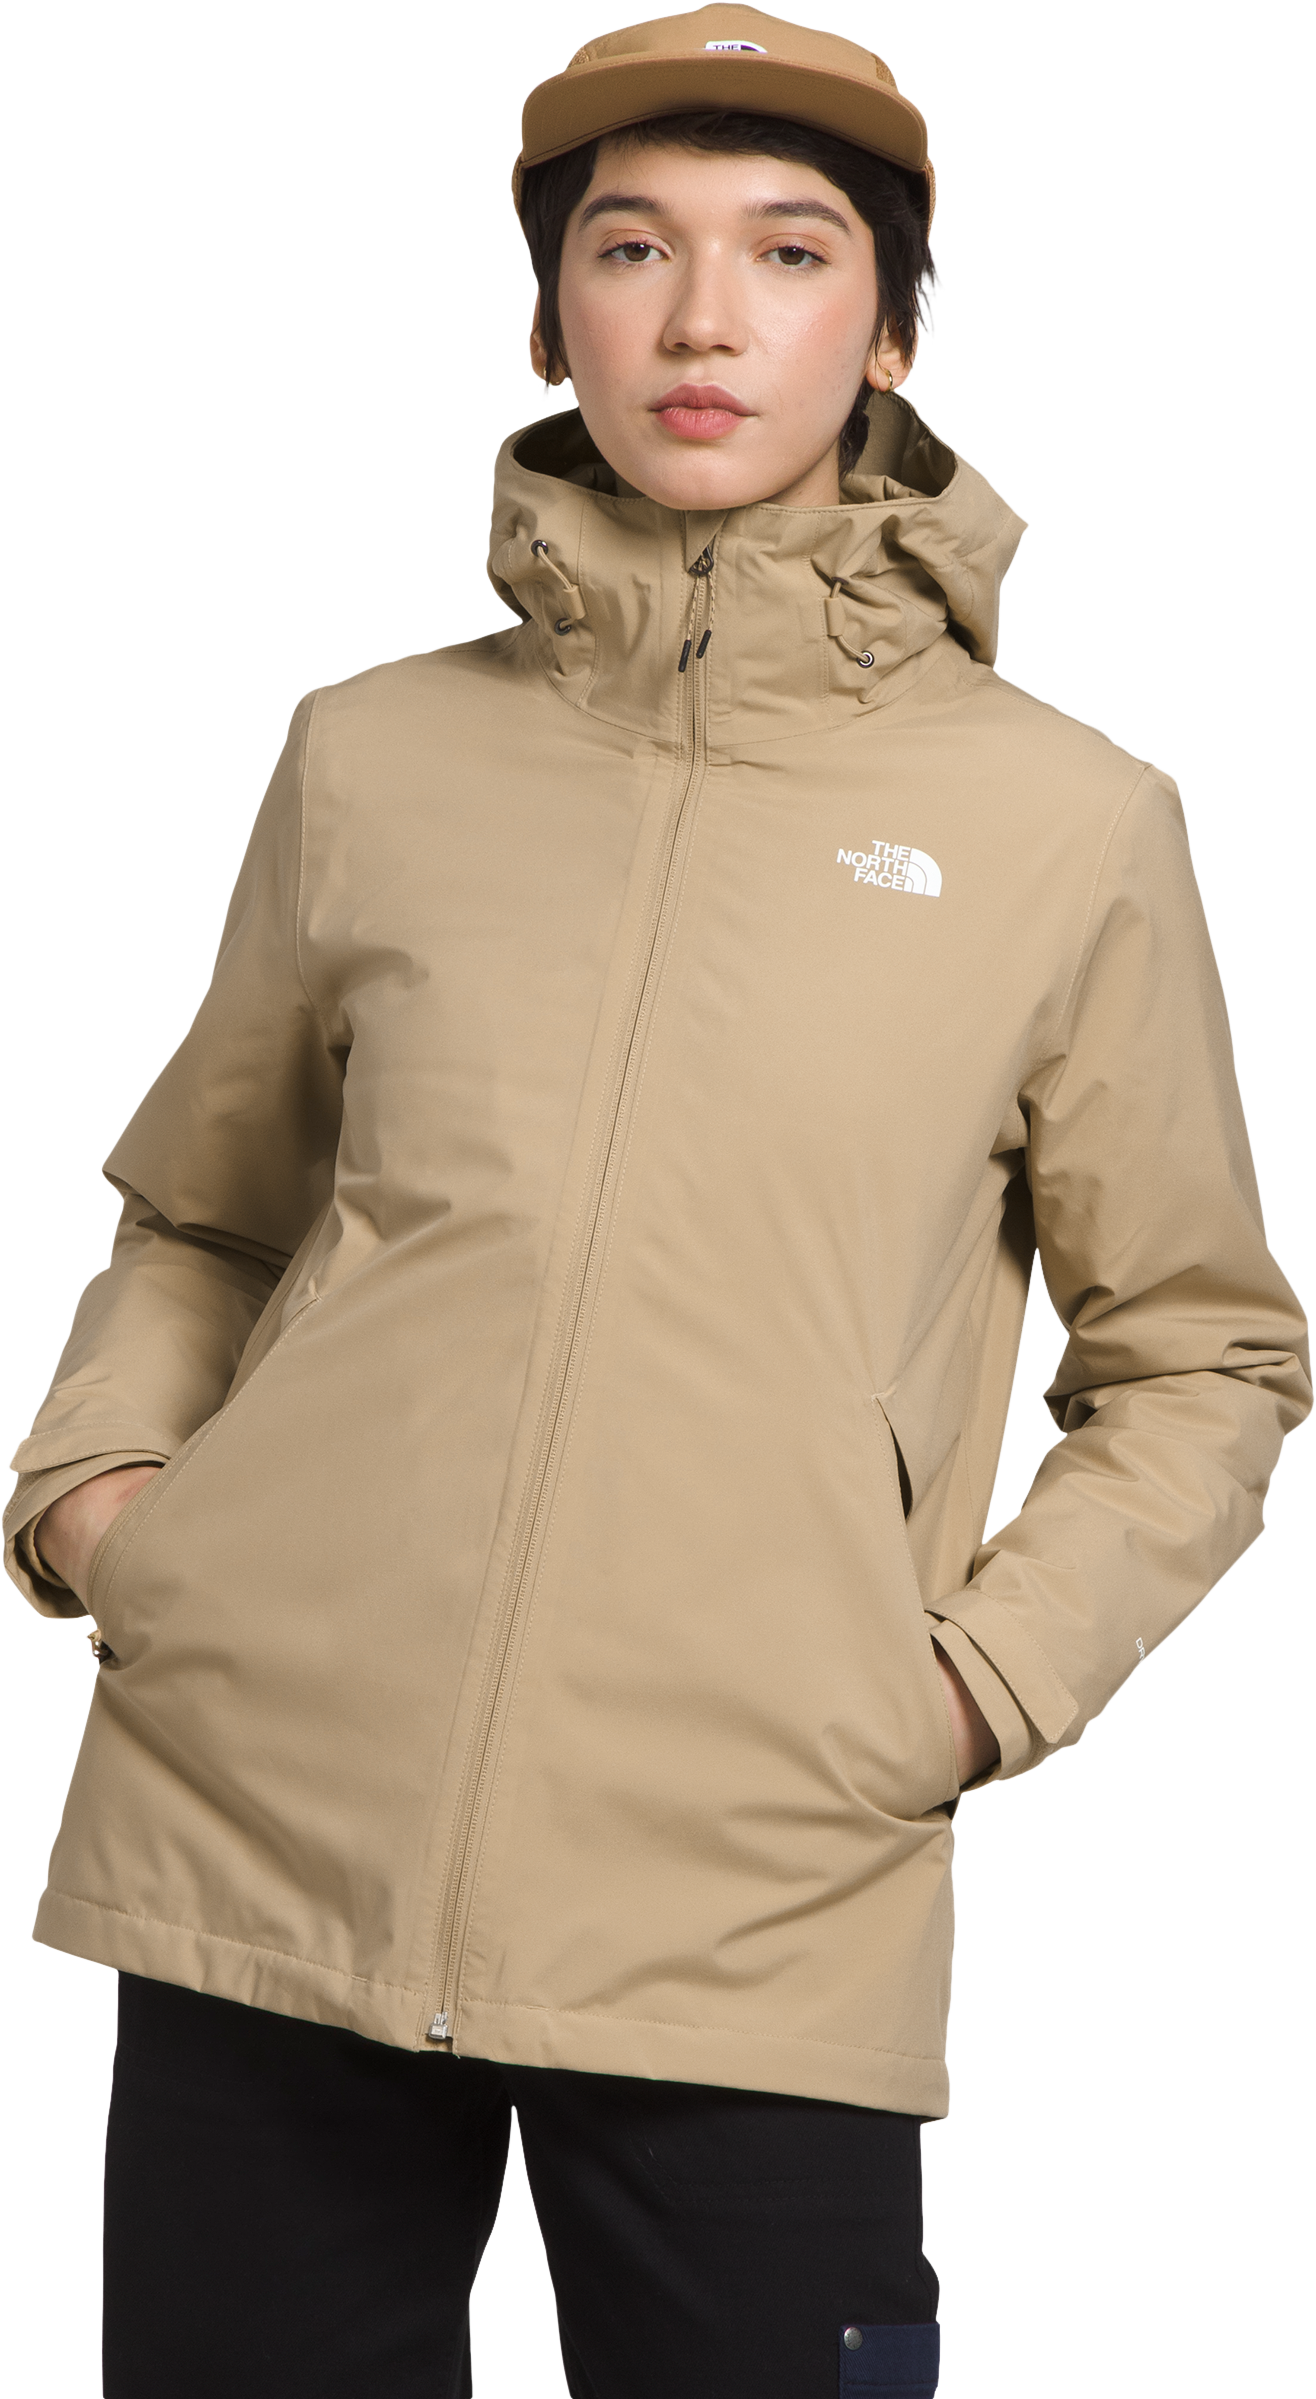 The North Face Carto Triclimate 3-in-1 Jacket for Ladies - Khaki Stone - S